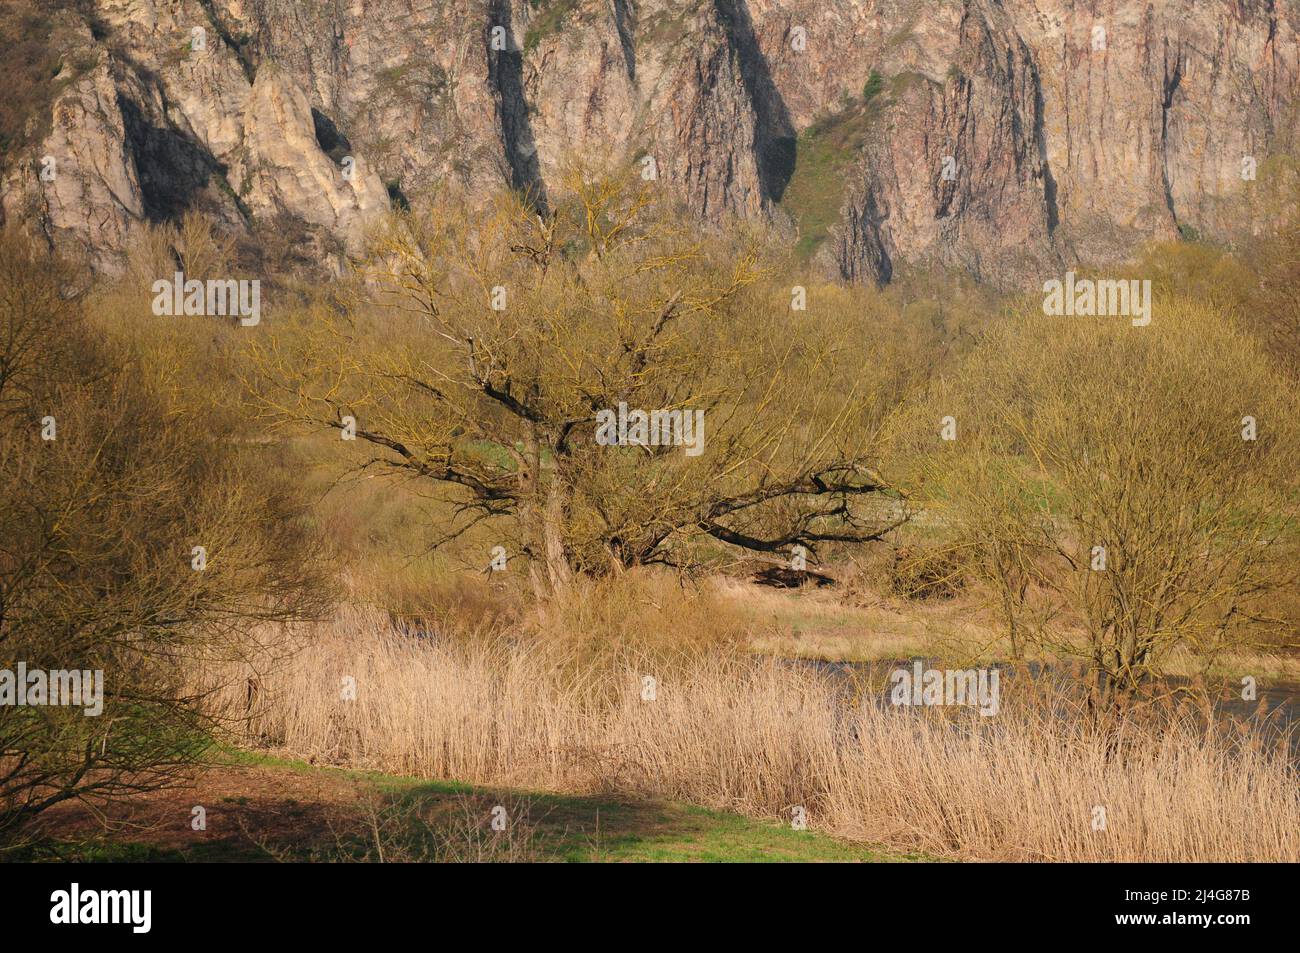 Wilderness Area Along The Nahe River At Natur Reserve Rotenfels Near Bad Kreuznach Rhineland-Palatine Germany On A Beautiful Spring Day Stock Photo